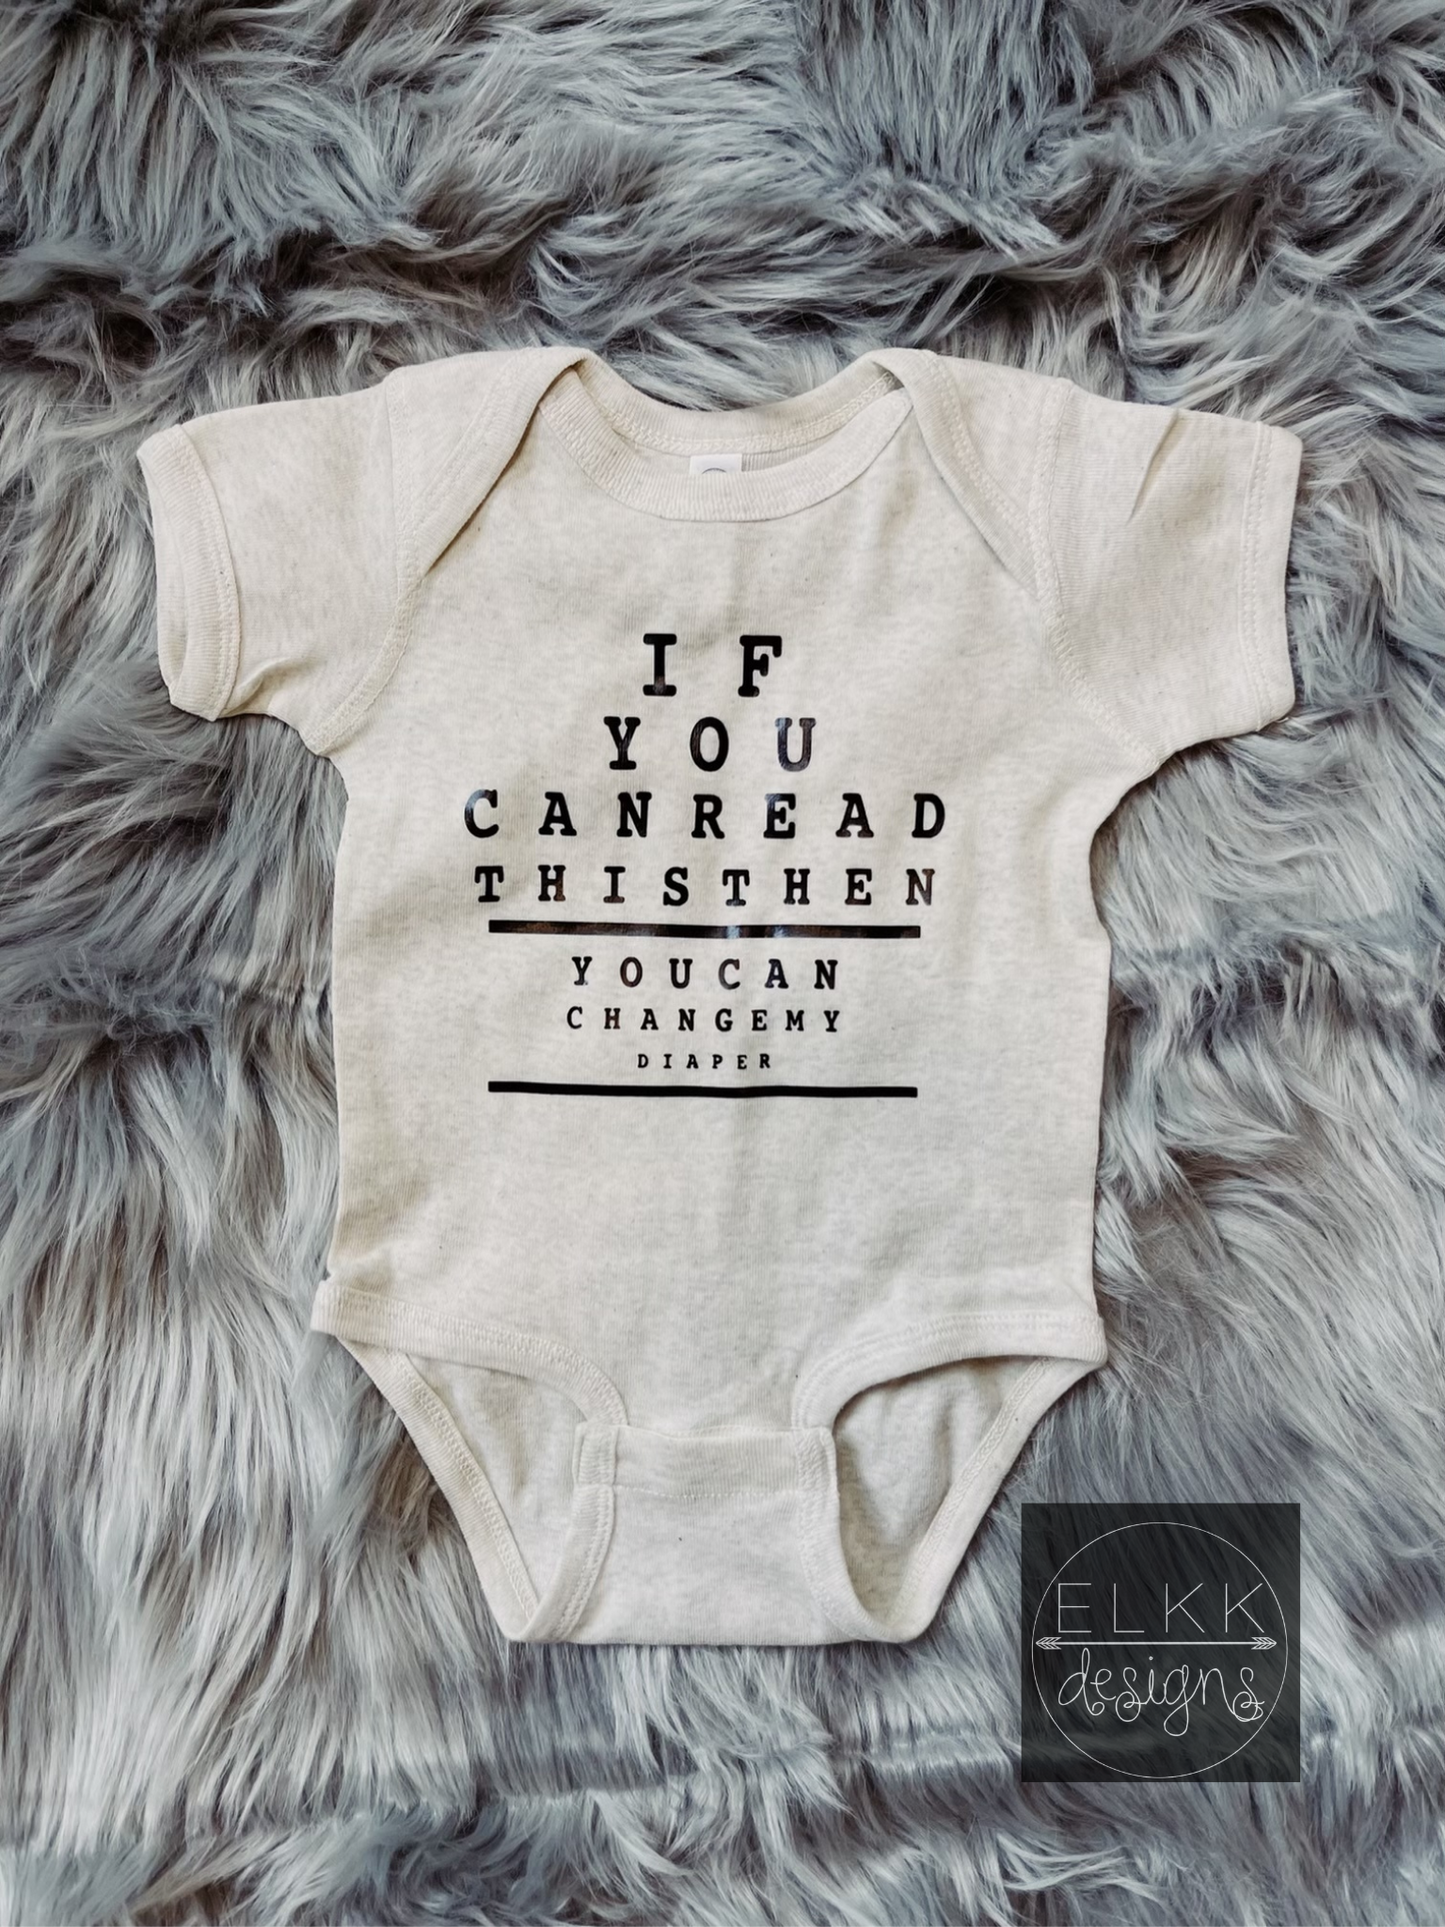 If you can read this onesie